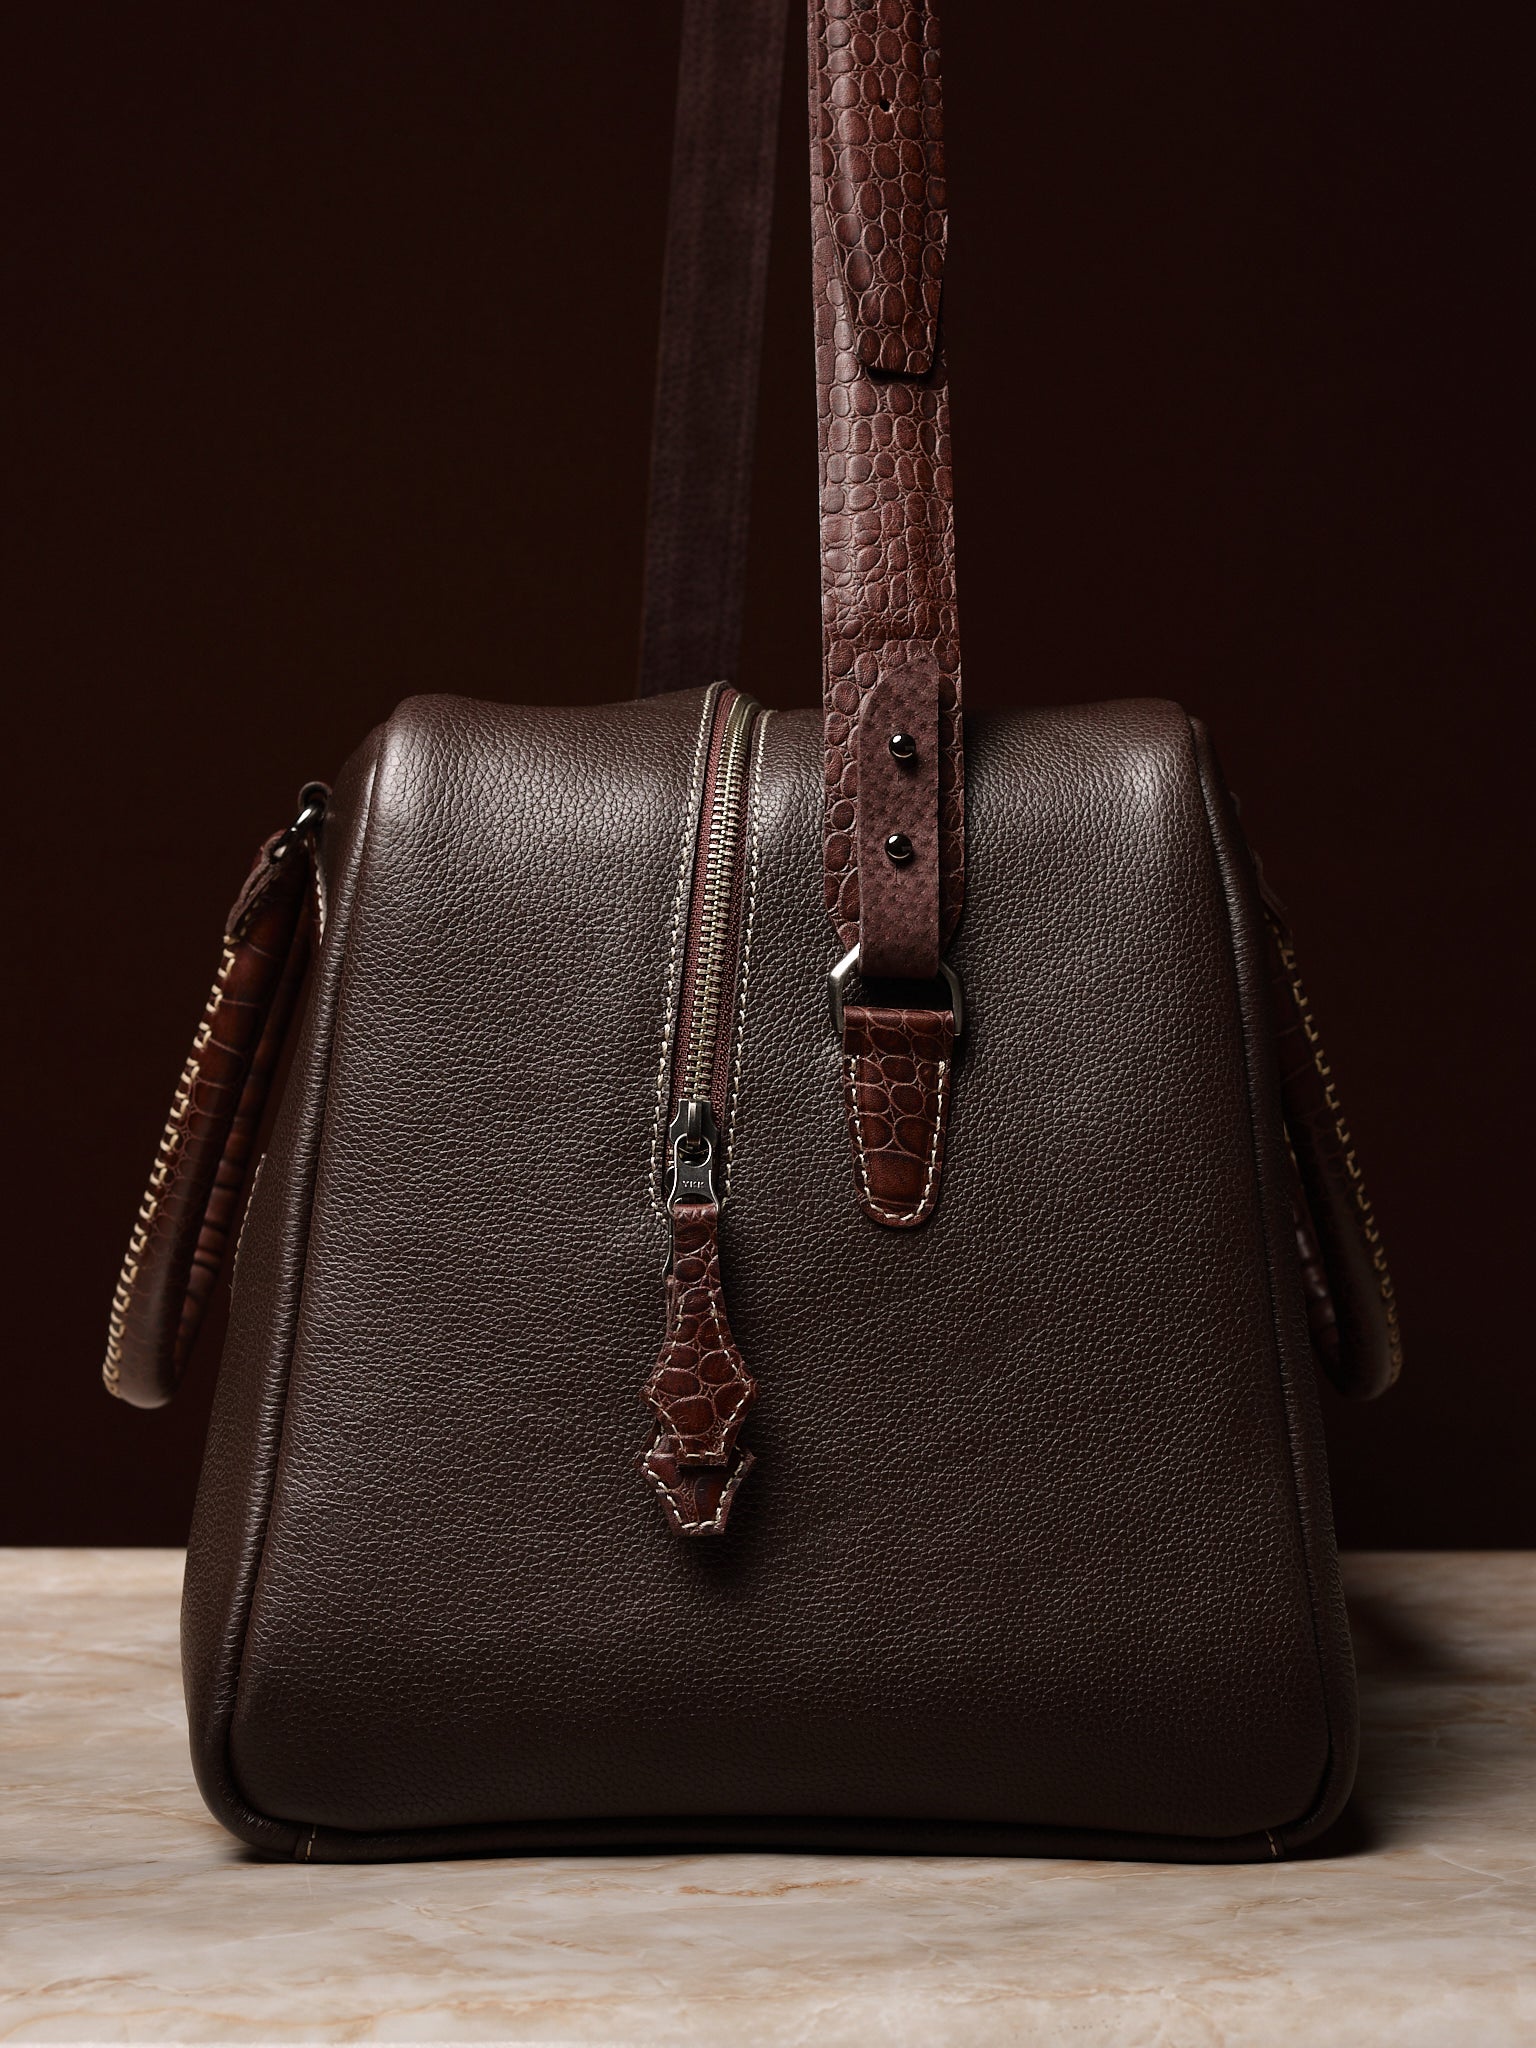 Limited Edtion Travel Bag. Large Duffle Bag Dark Brown by Capra Leather